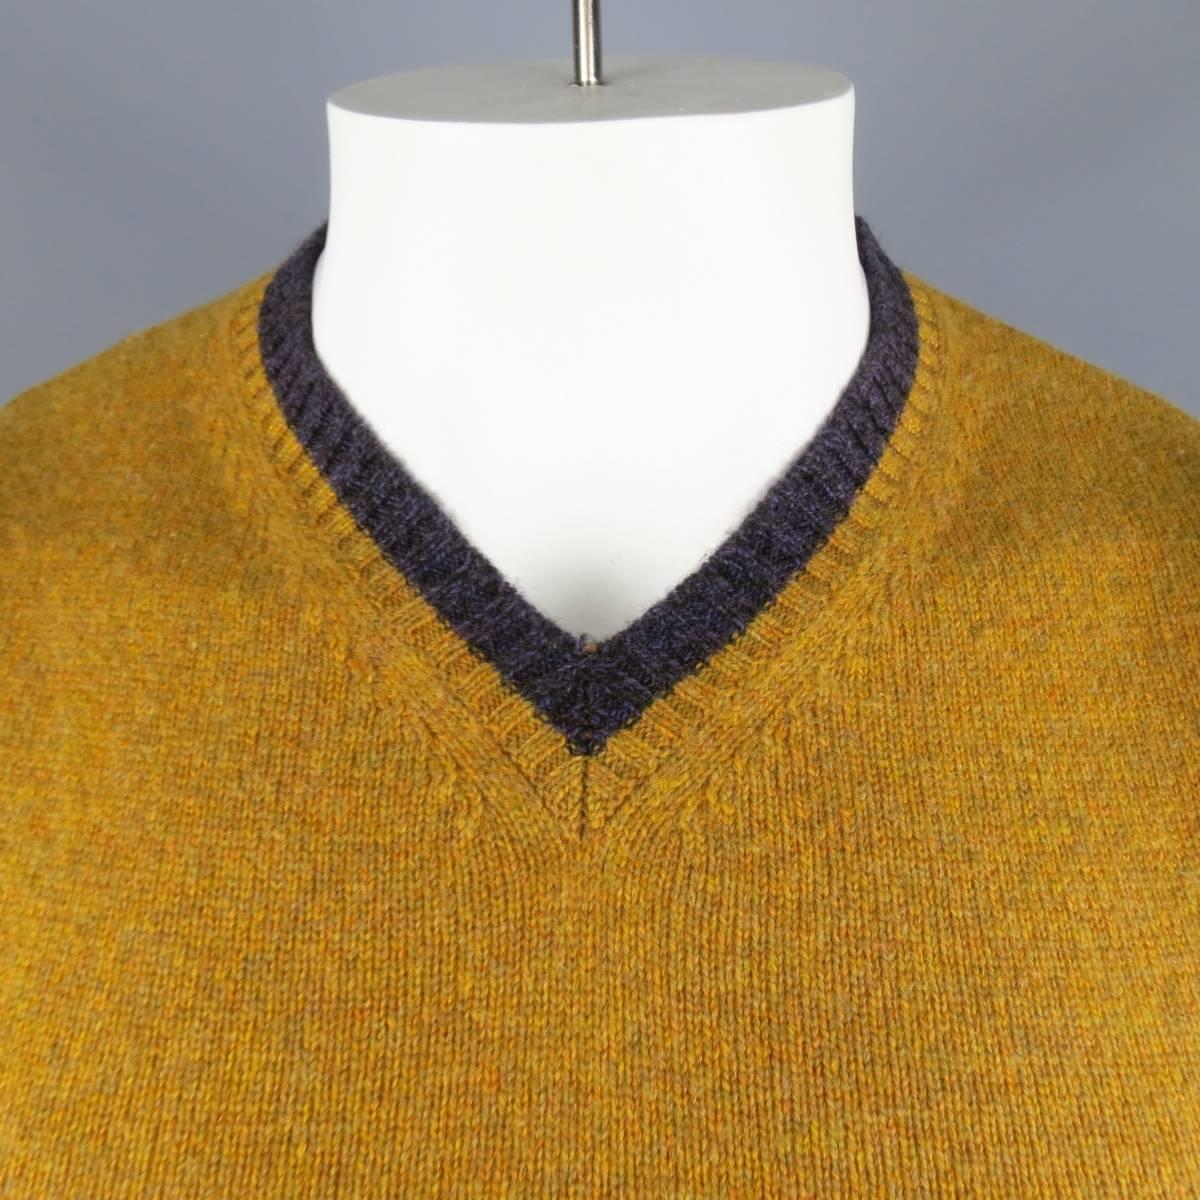 ETRO Vest consists of merino wool material in a mustard (gold) color tone. Designed in a v-neck collar, color blocked with purple accents. Detailed in a heather pattern. Made in Italy.
 
Excellent Pre-Owned Condition
Marked Size: M
 
Measurements
